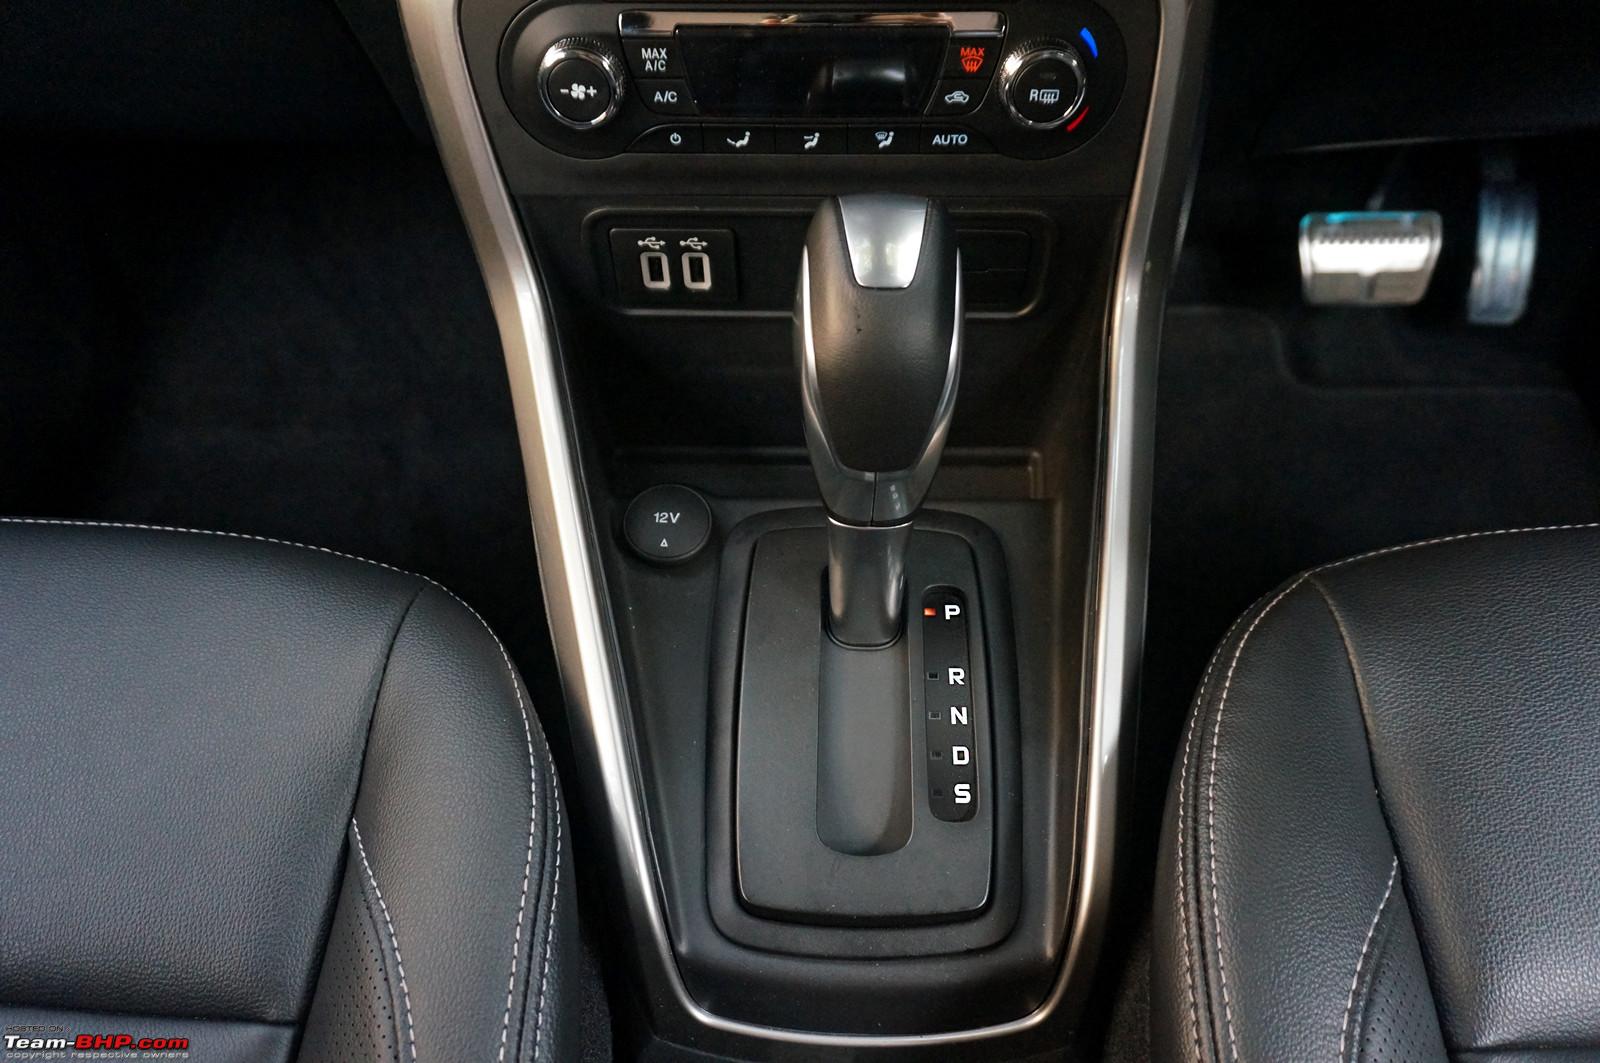 Unconventional Automatic Gear-Shifters seen in cars - Team-BHP